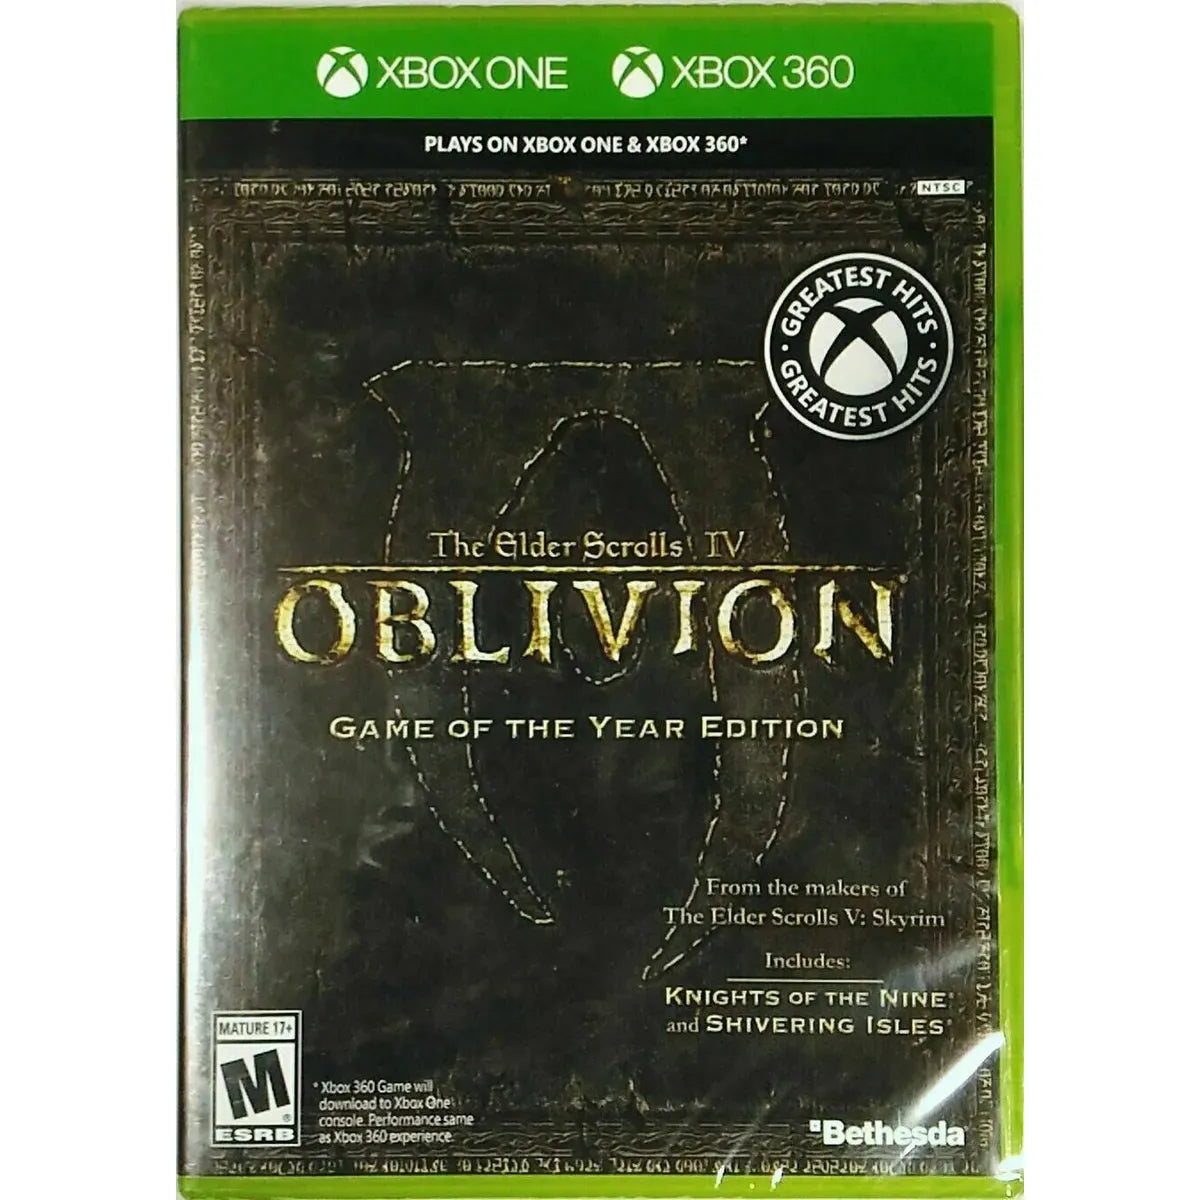 XBOX ONE - The Elder Scrolls IV Oblivion Game of the Year Edition